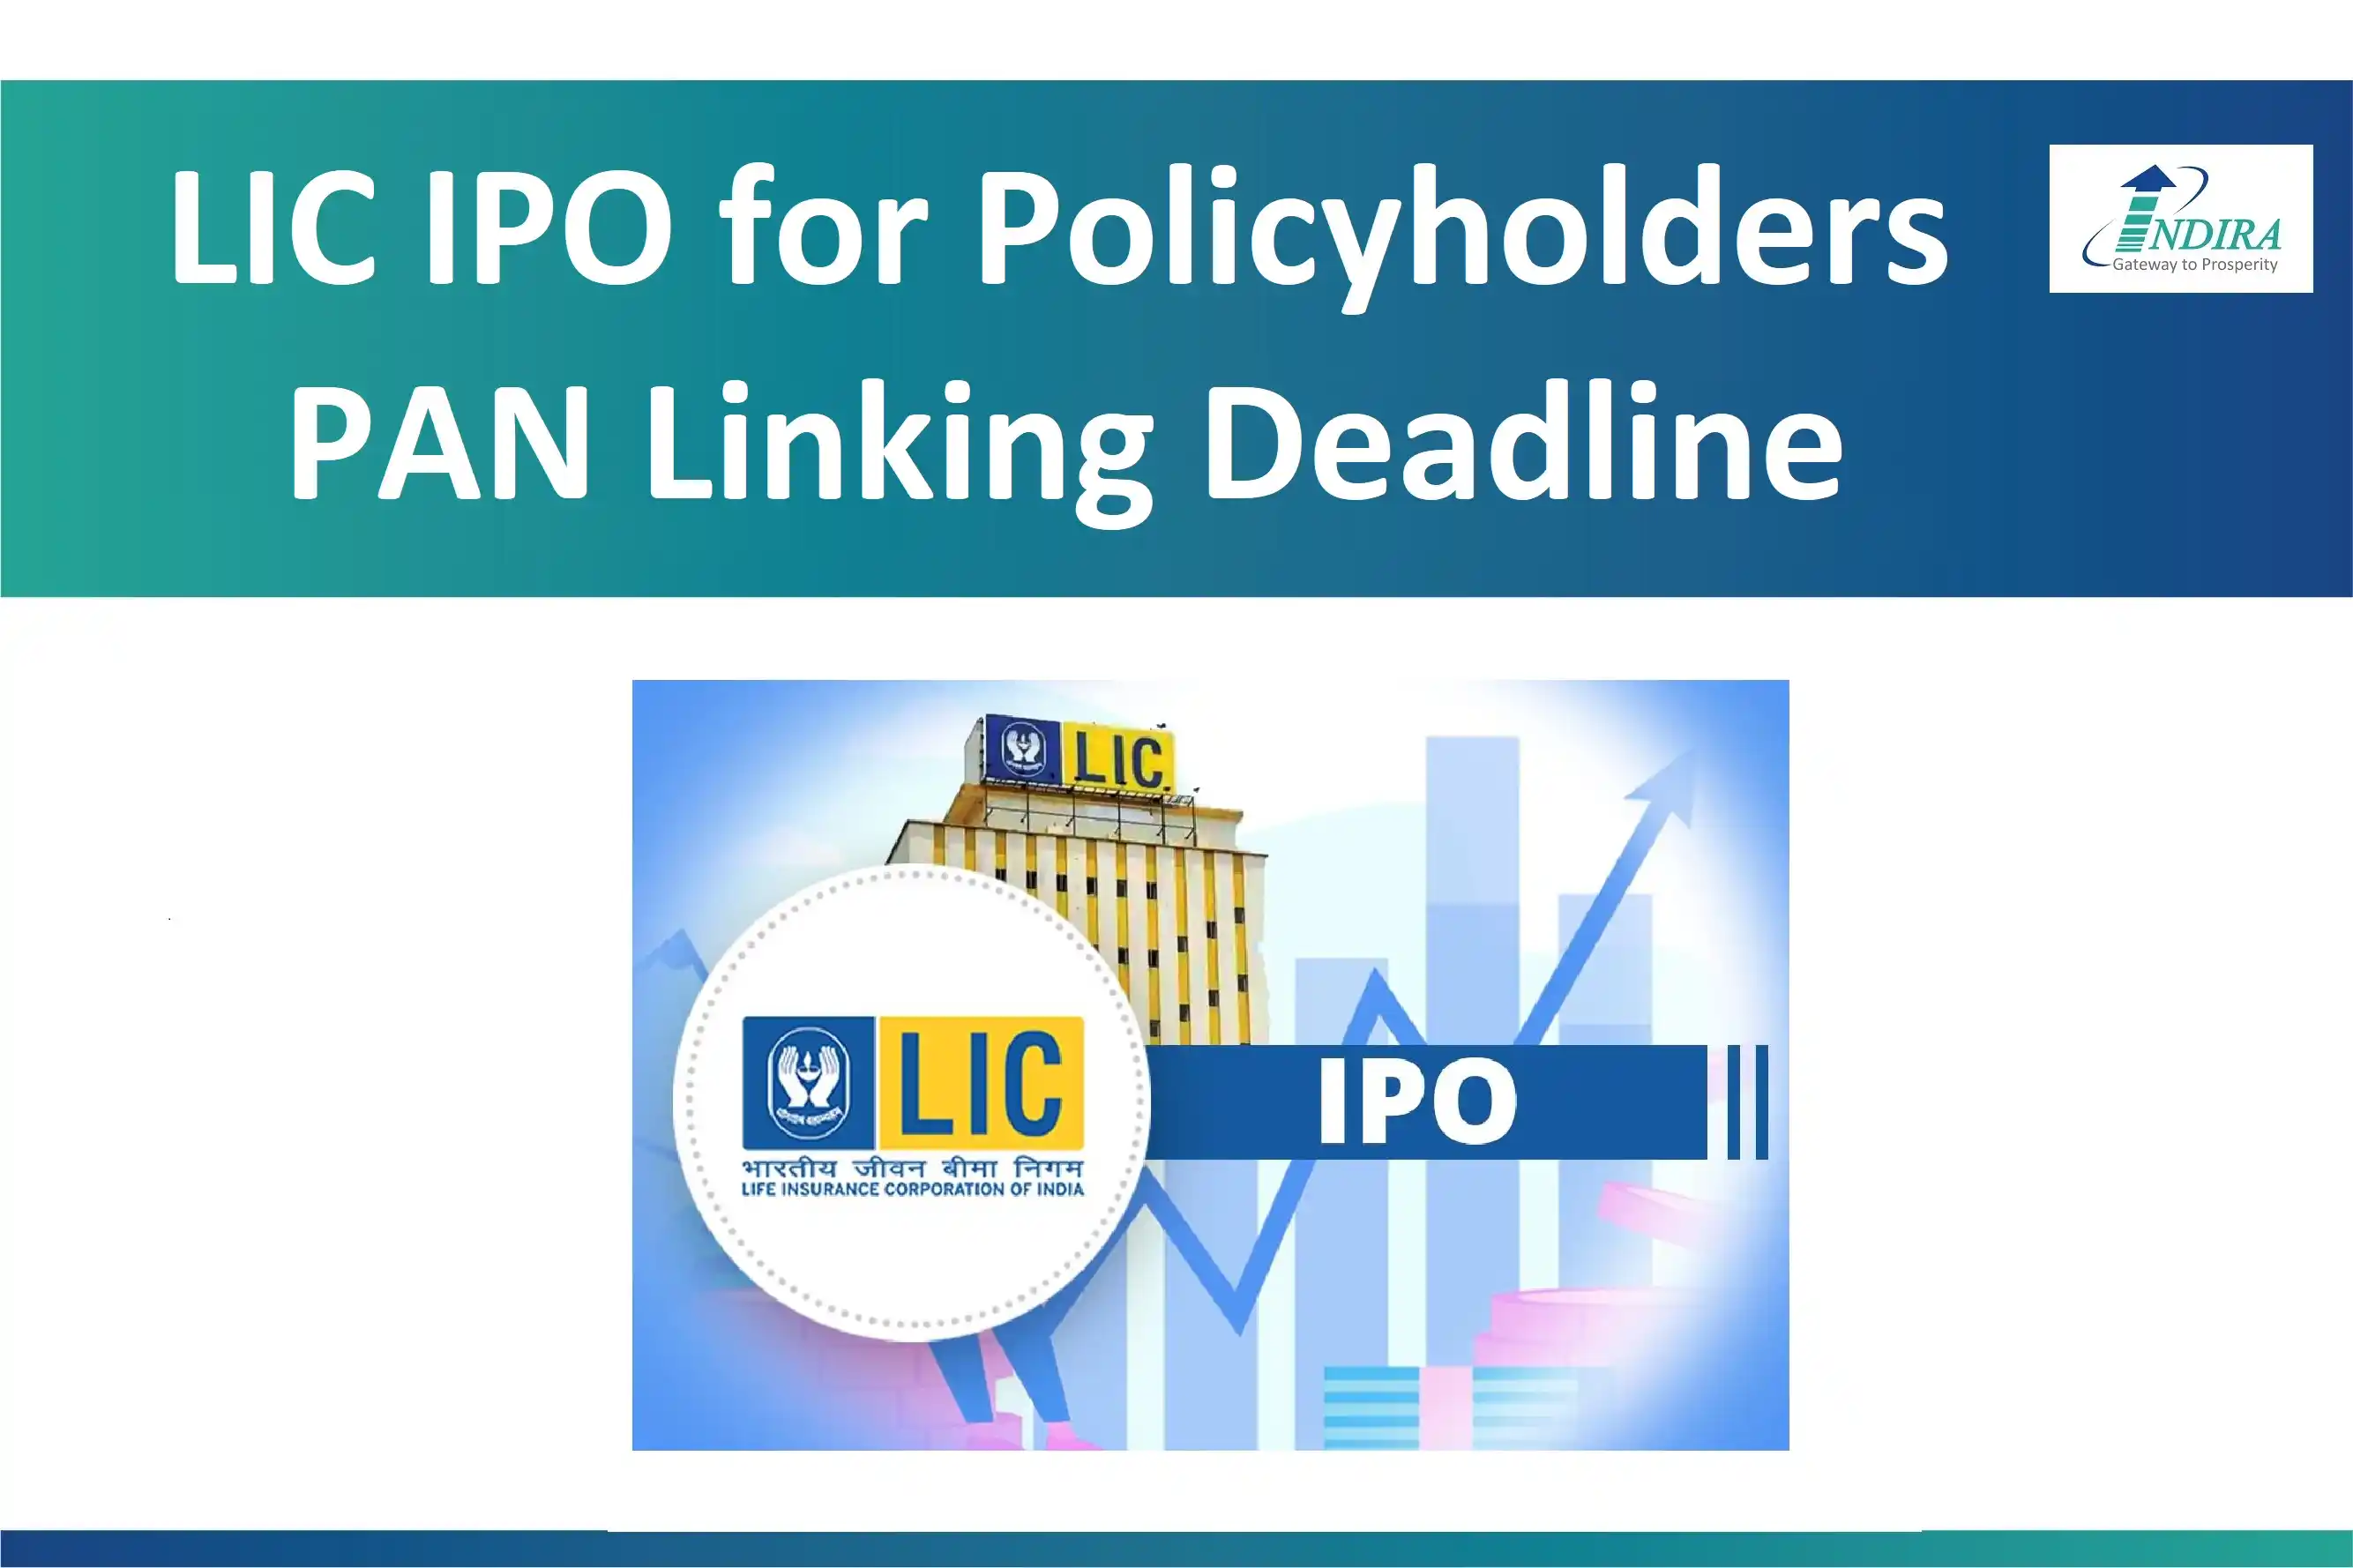 LIC IPO - Deadline for policyholders to Linking PAN Card With LIC 